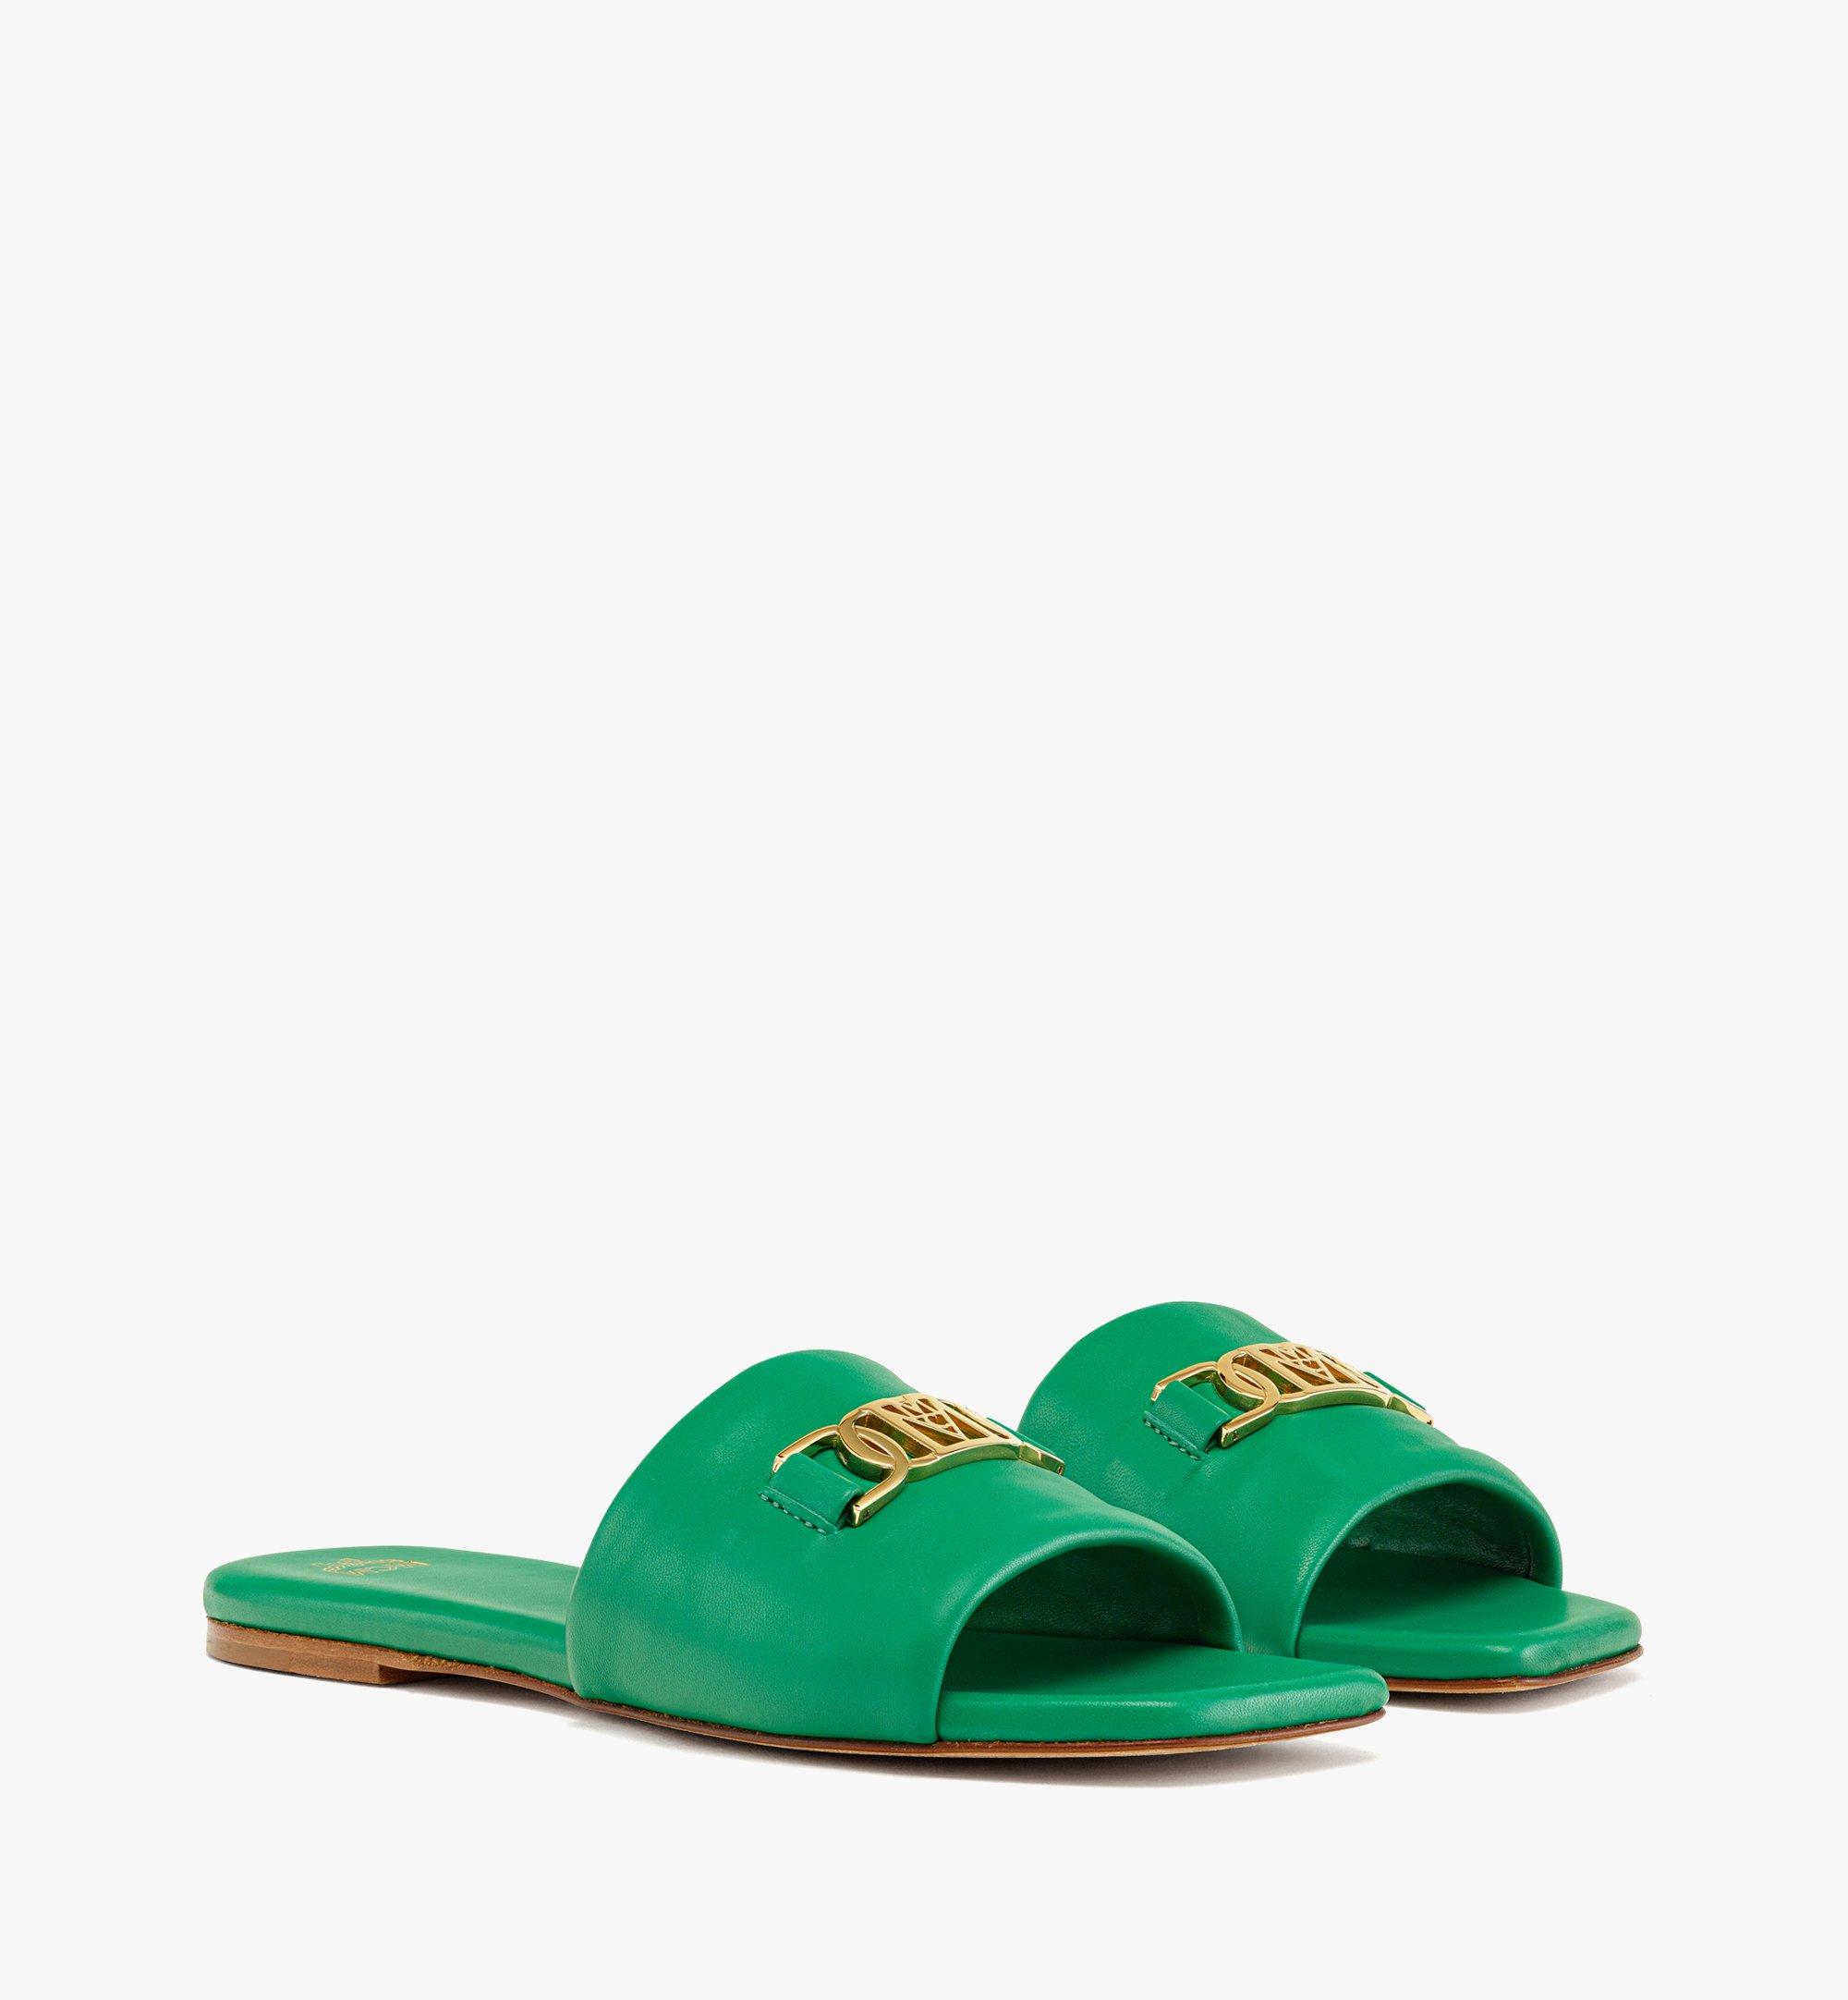 Mcm Mode Travia Sandals In Lamb Leather In Bosphorus